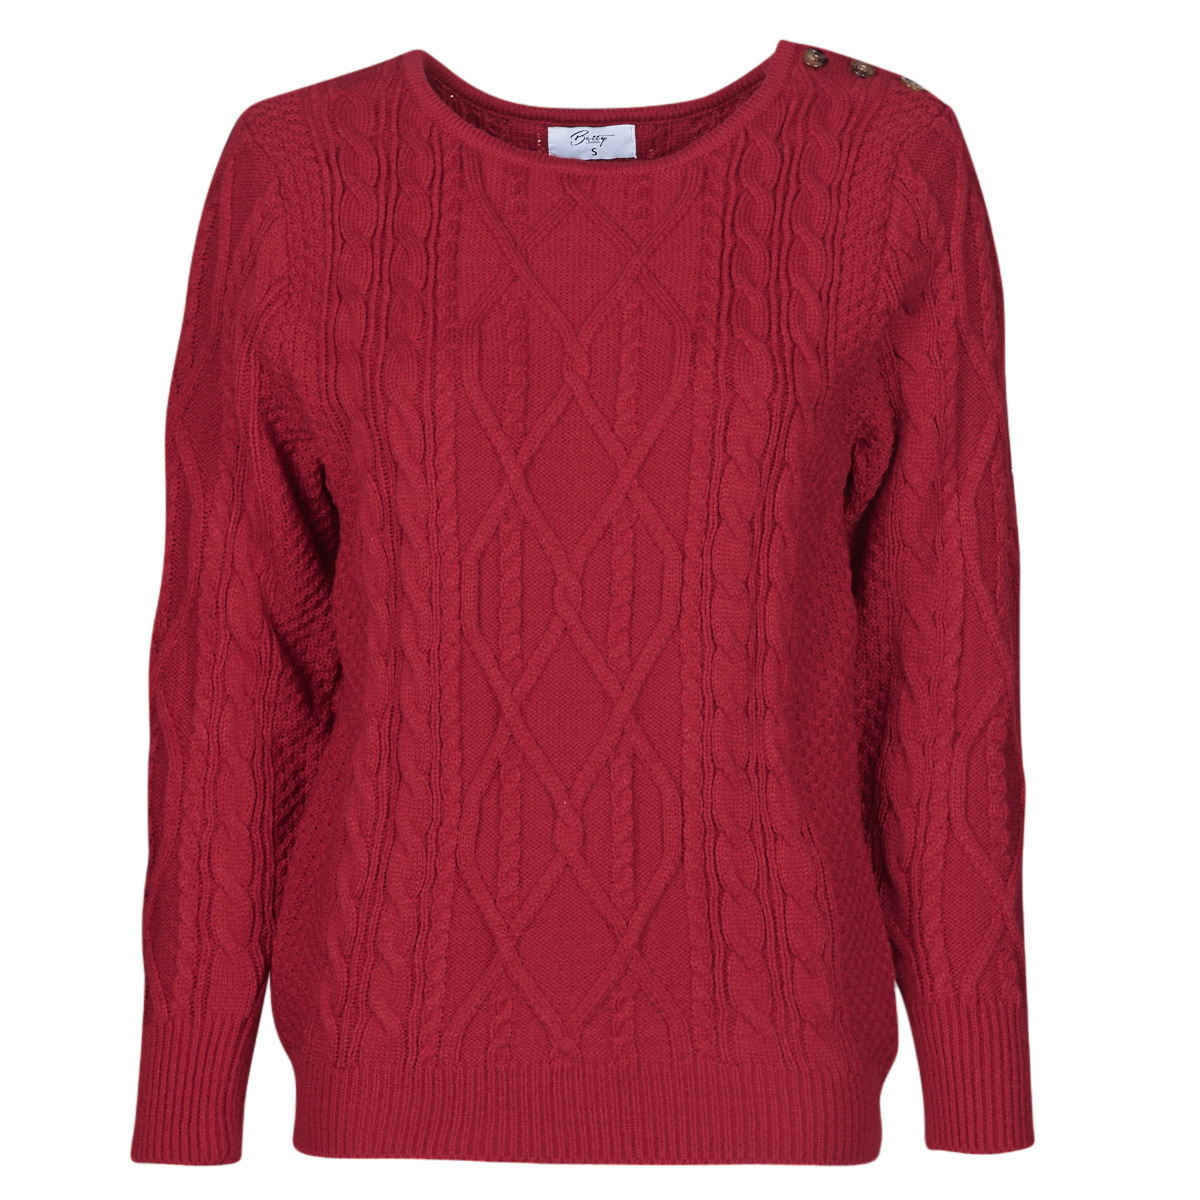 Betty London - Woman Sweater in Red - Spartoo GOOFASH